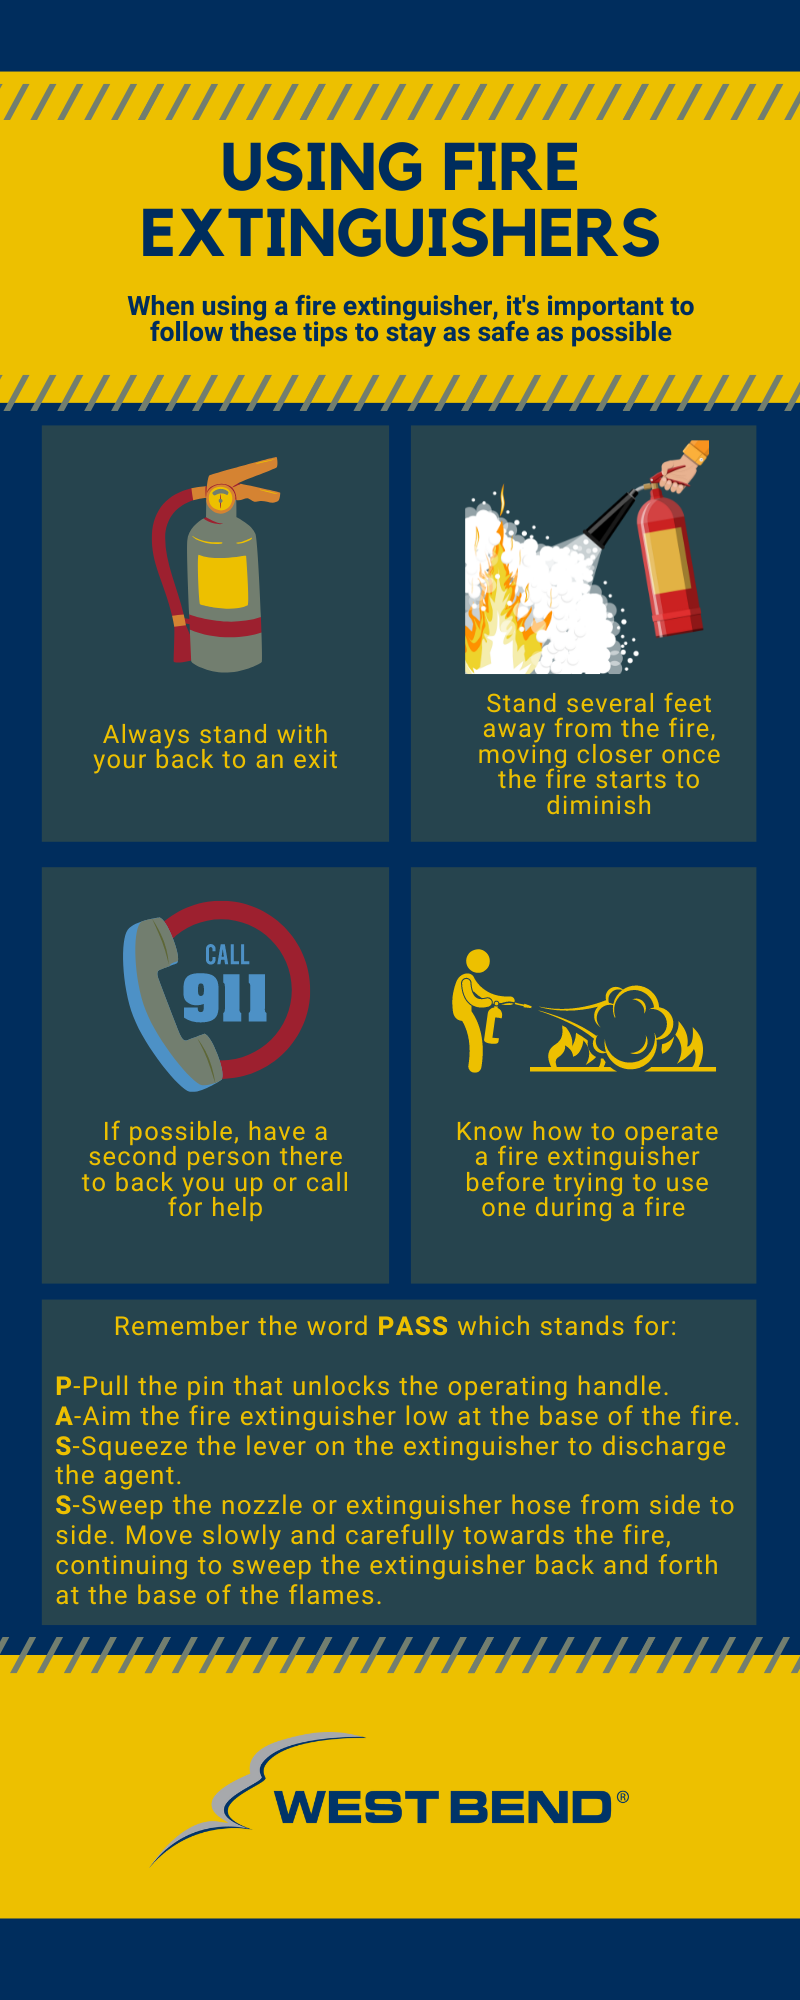 Fire Extinguisher infographic image